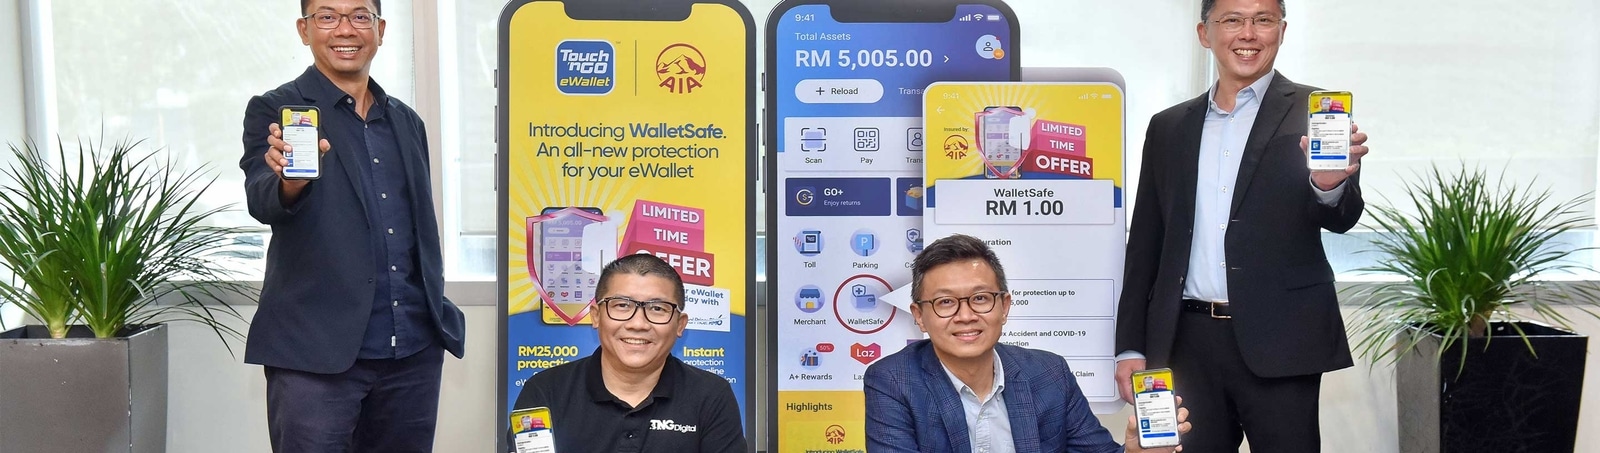 touch-n-go-ewallet-and-aia-malaysia-introduce-walletsafe-at-just-rm1-banner.jpeg